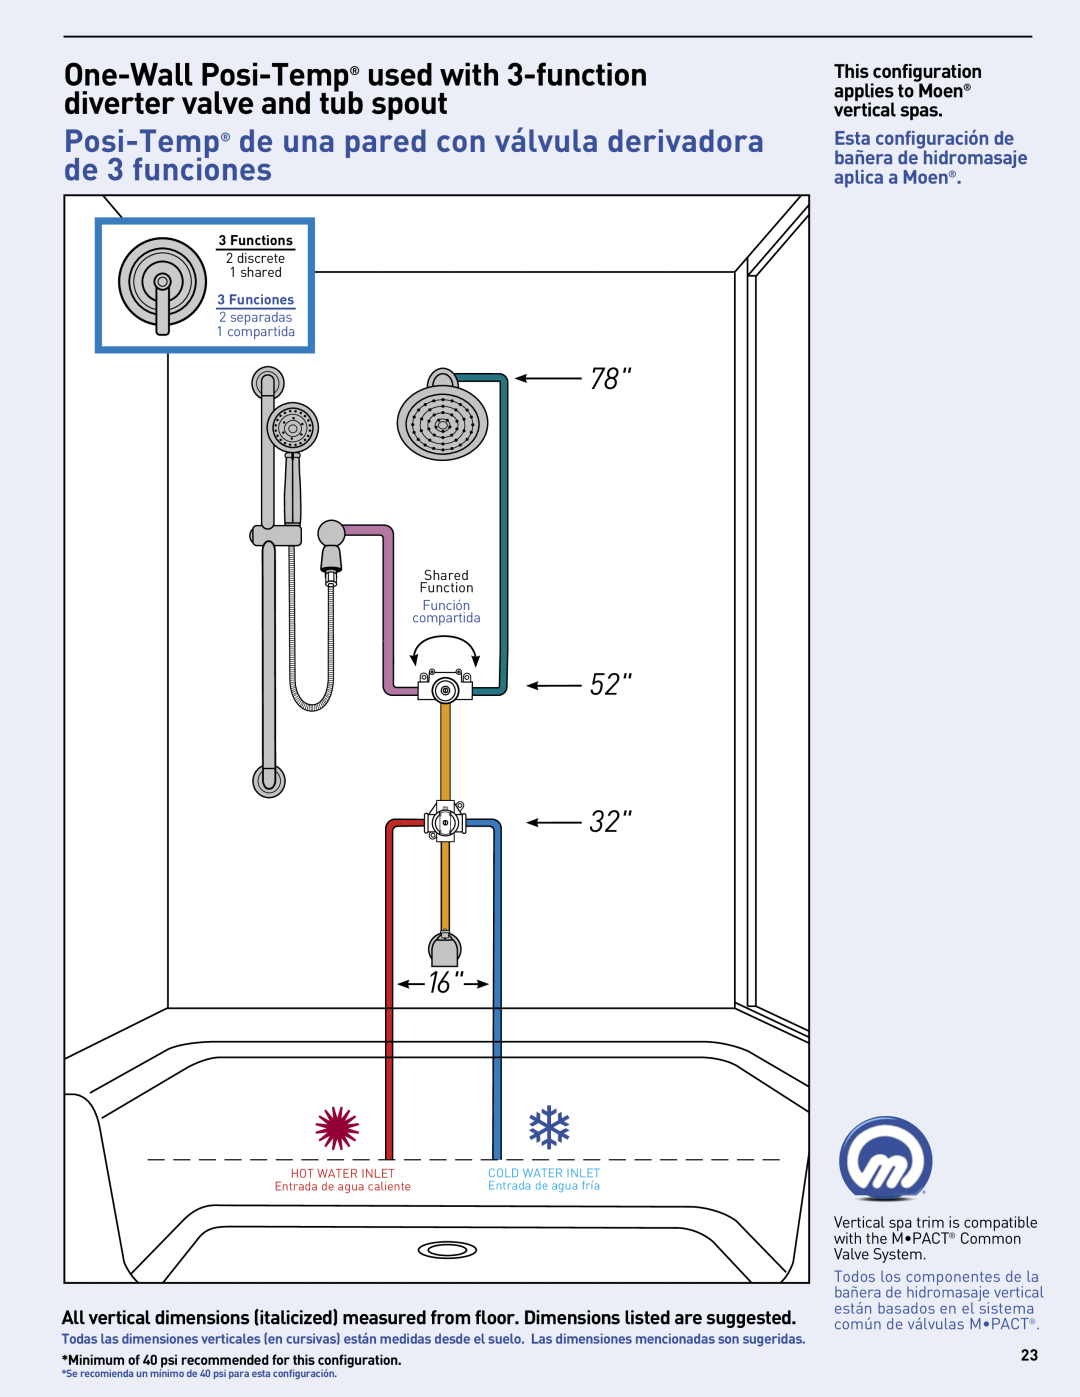 Moen MF2816 One-Wall Posi-Temp used with 3-function diverter valve and tub spout, discrete, shared, Shared, Functions 